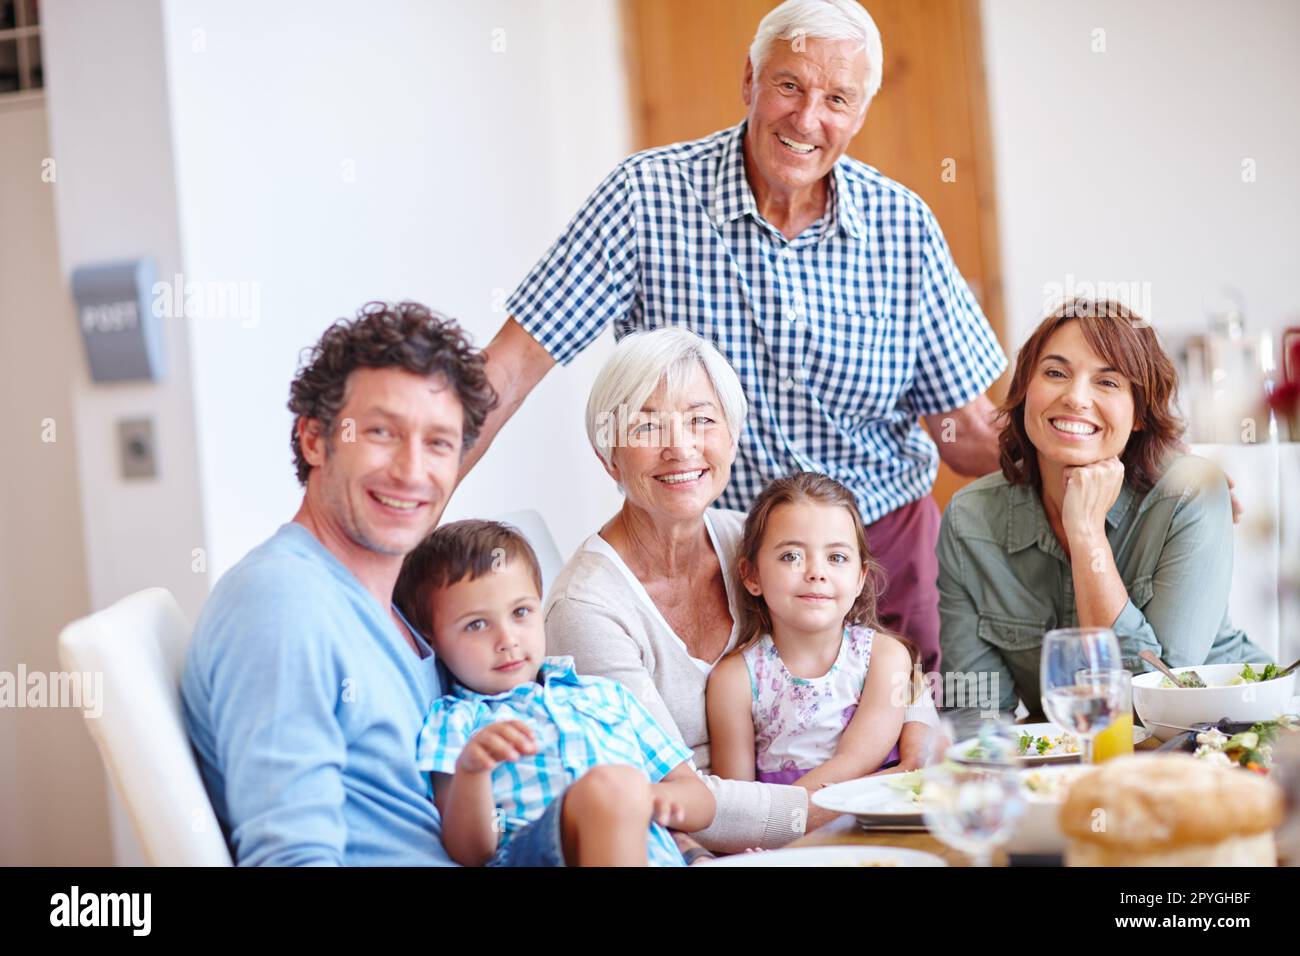 Good food brings families together. a multi-generational family having a meal together. Stock Photo